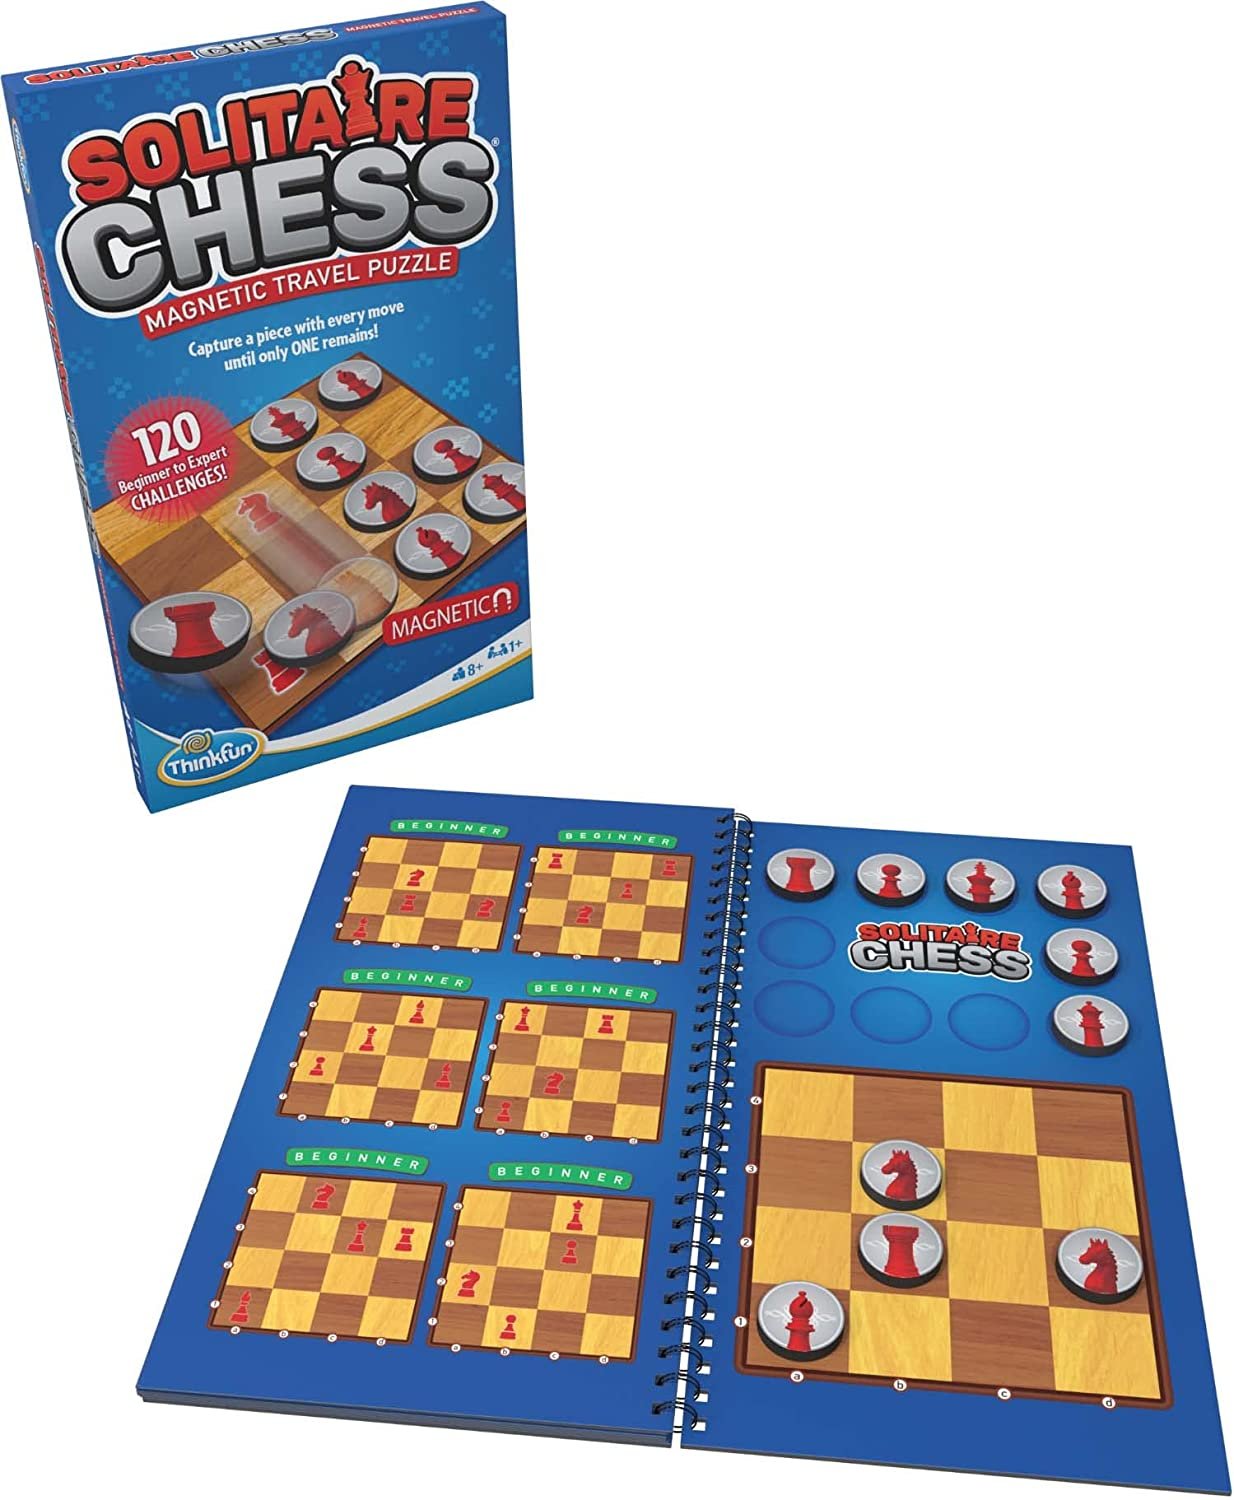 The Best Gifts for Chess Players